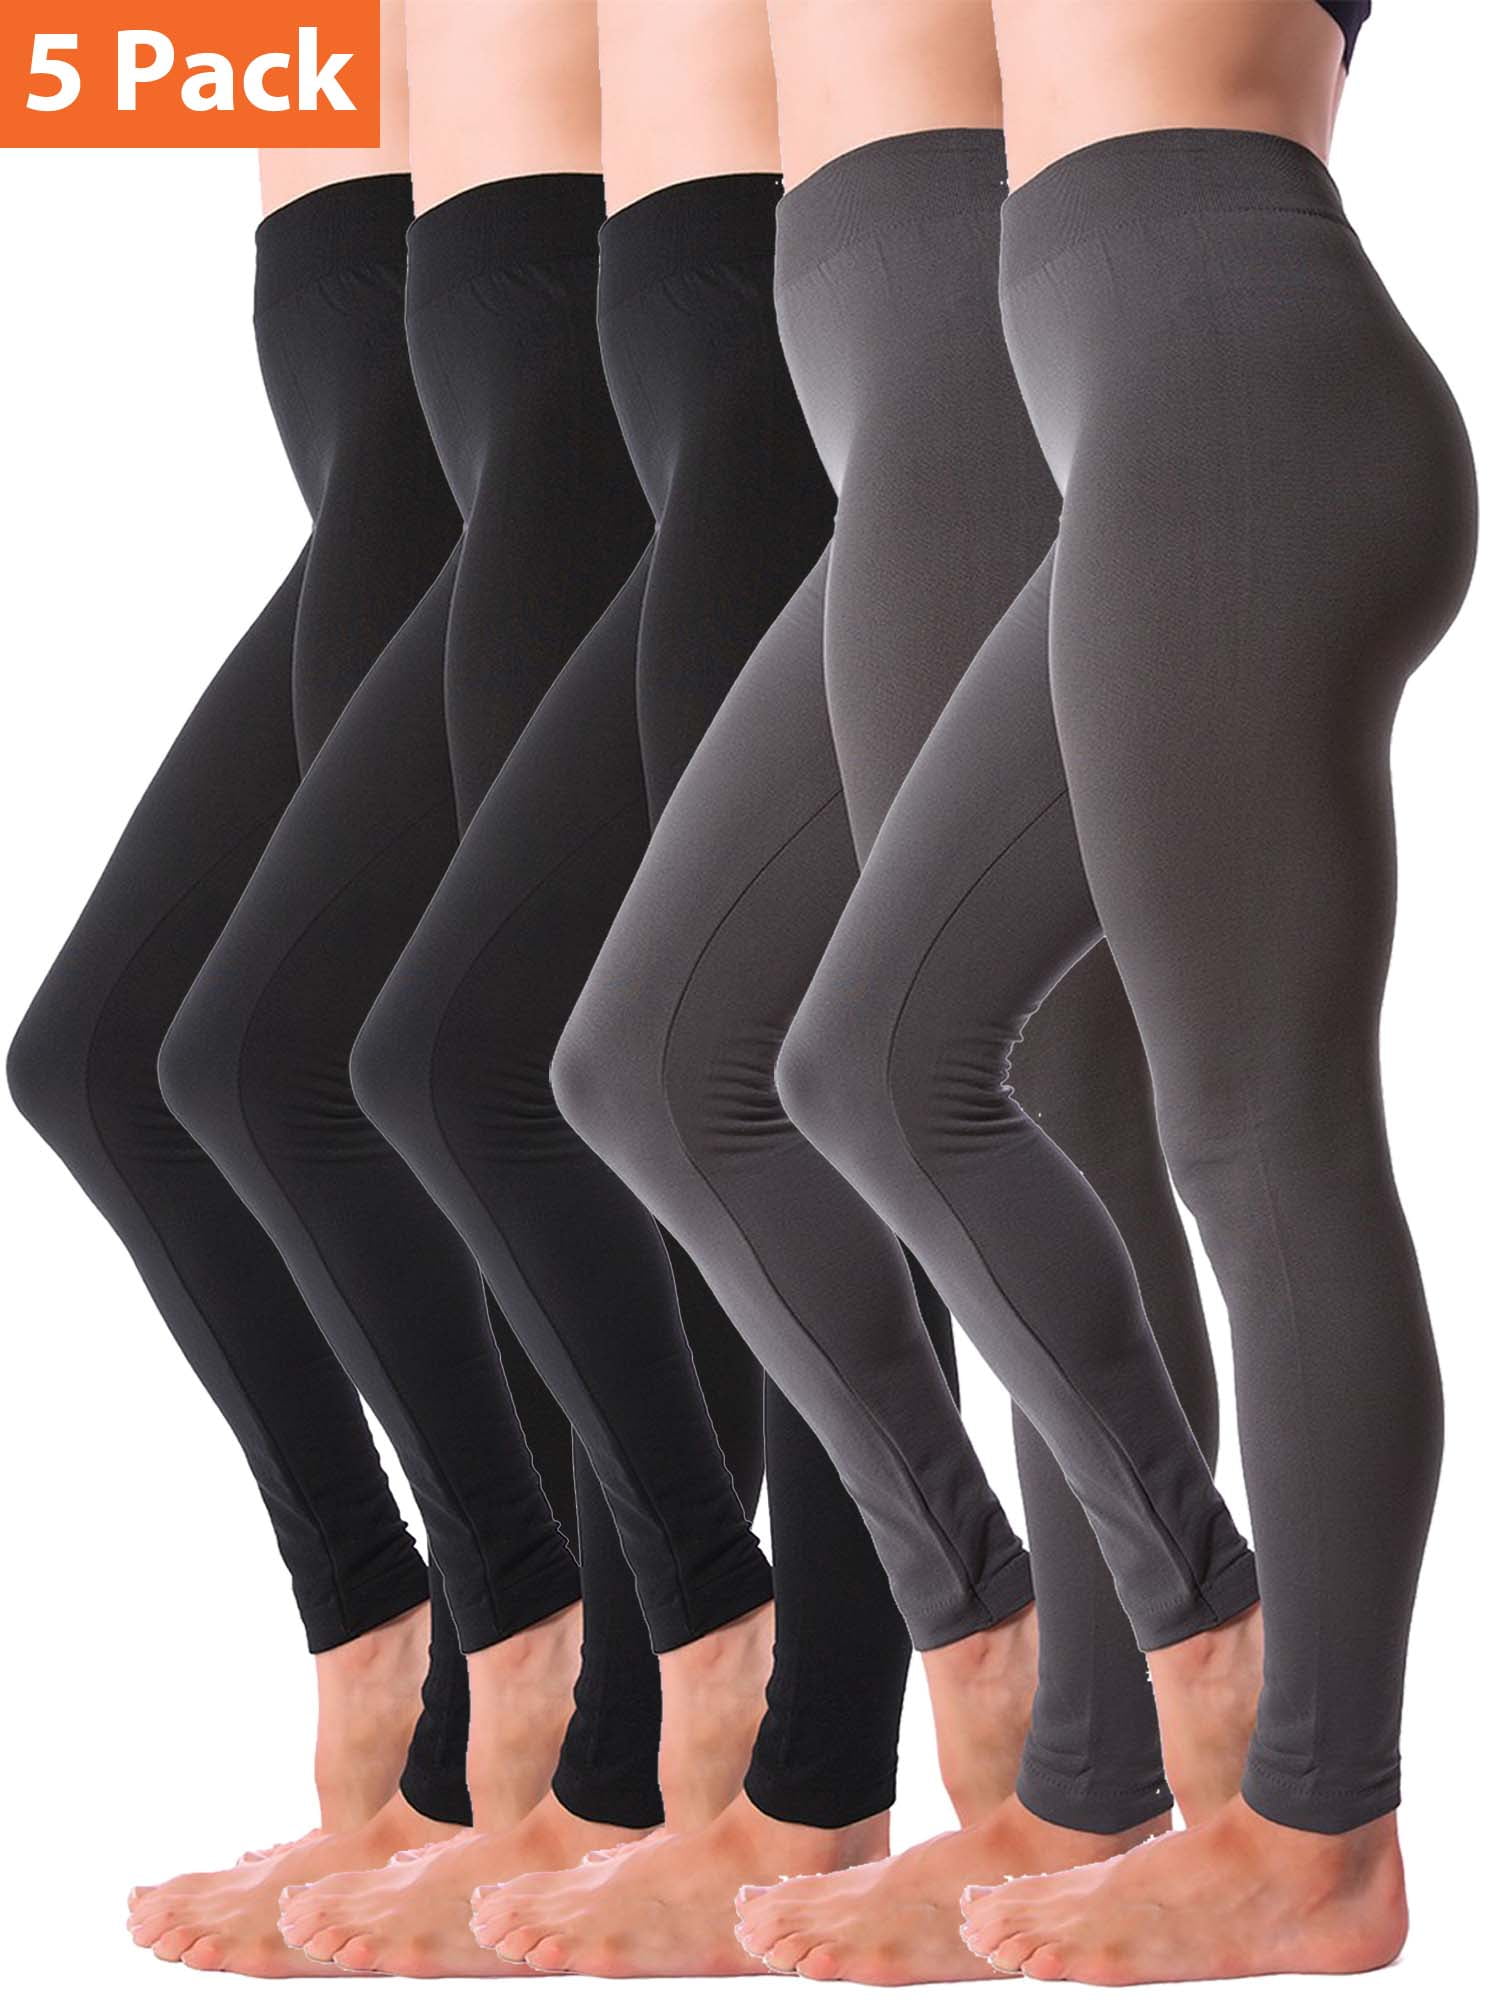 Winter leggings to keep your warm in winter - we selected the best ones!